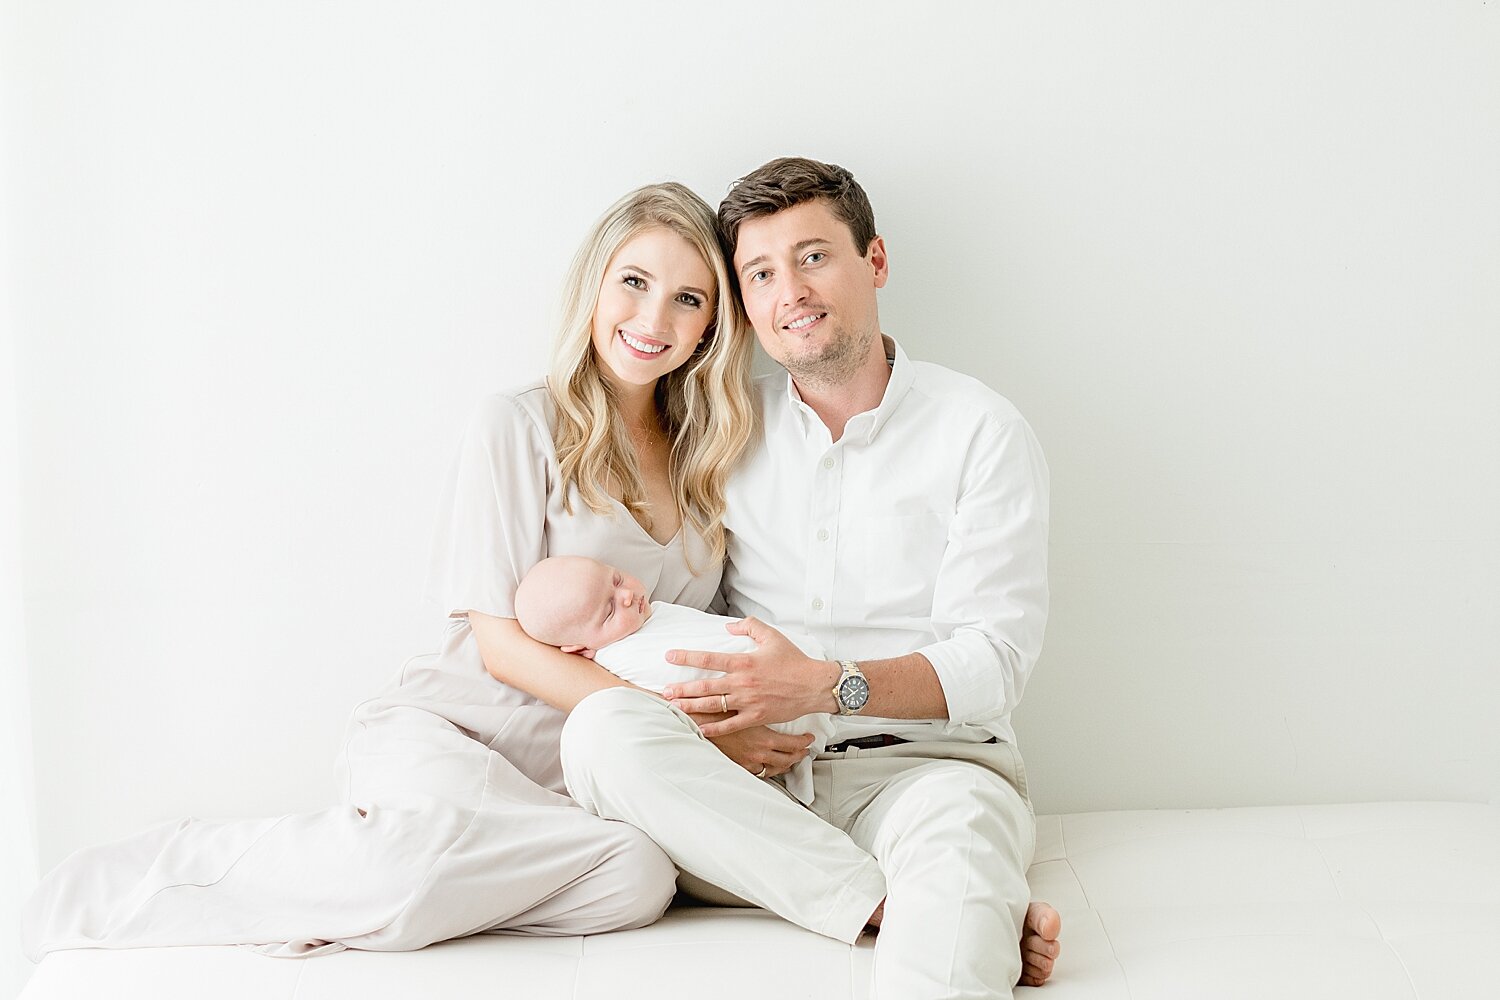 Classic newborn portrait in a studio in Connecticut. Photos by Kristin Wood Photography.